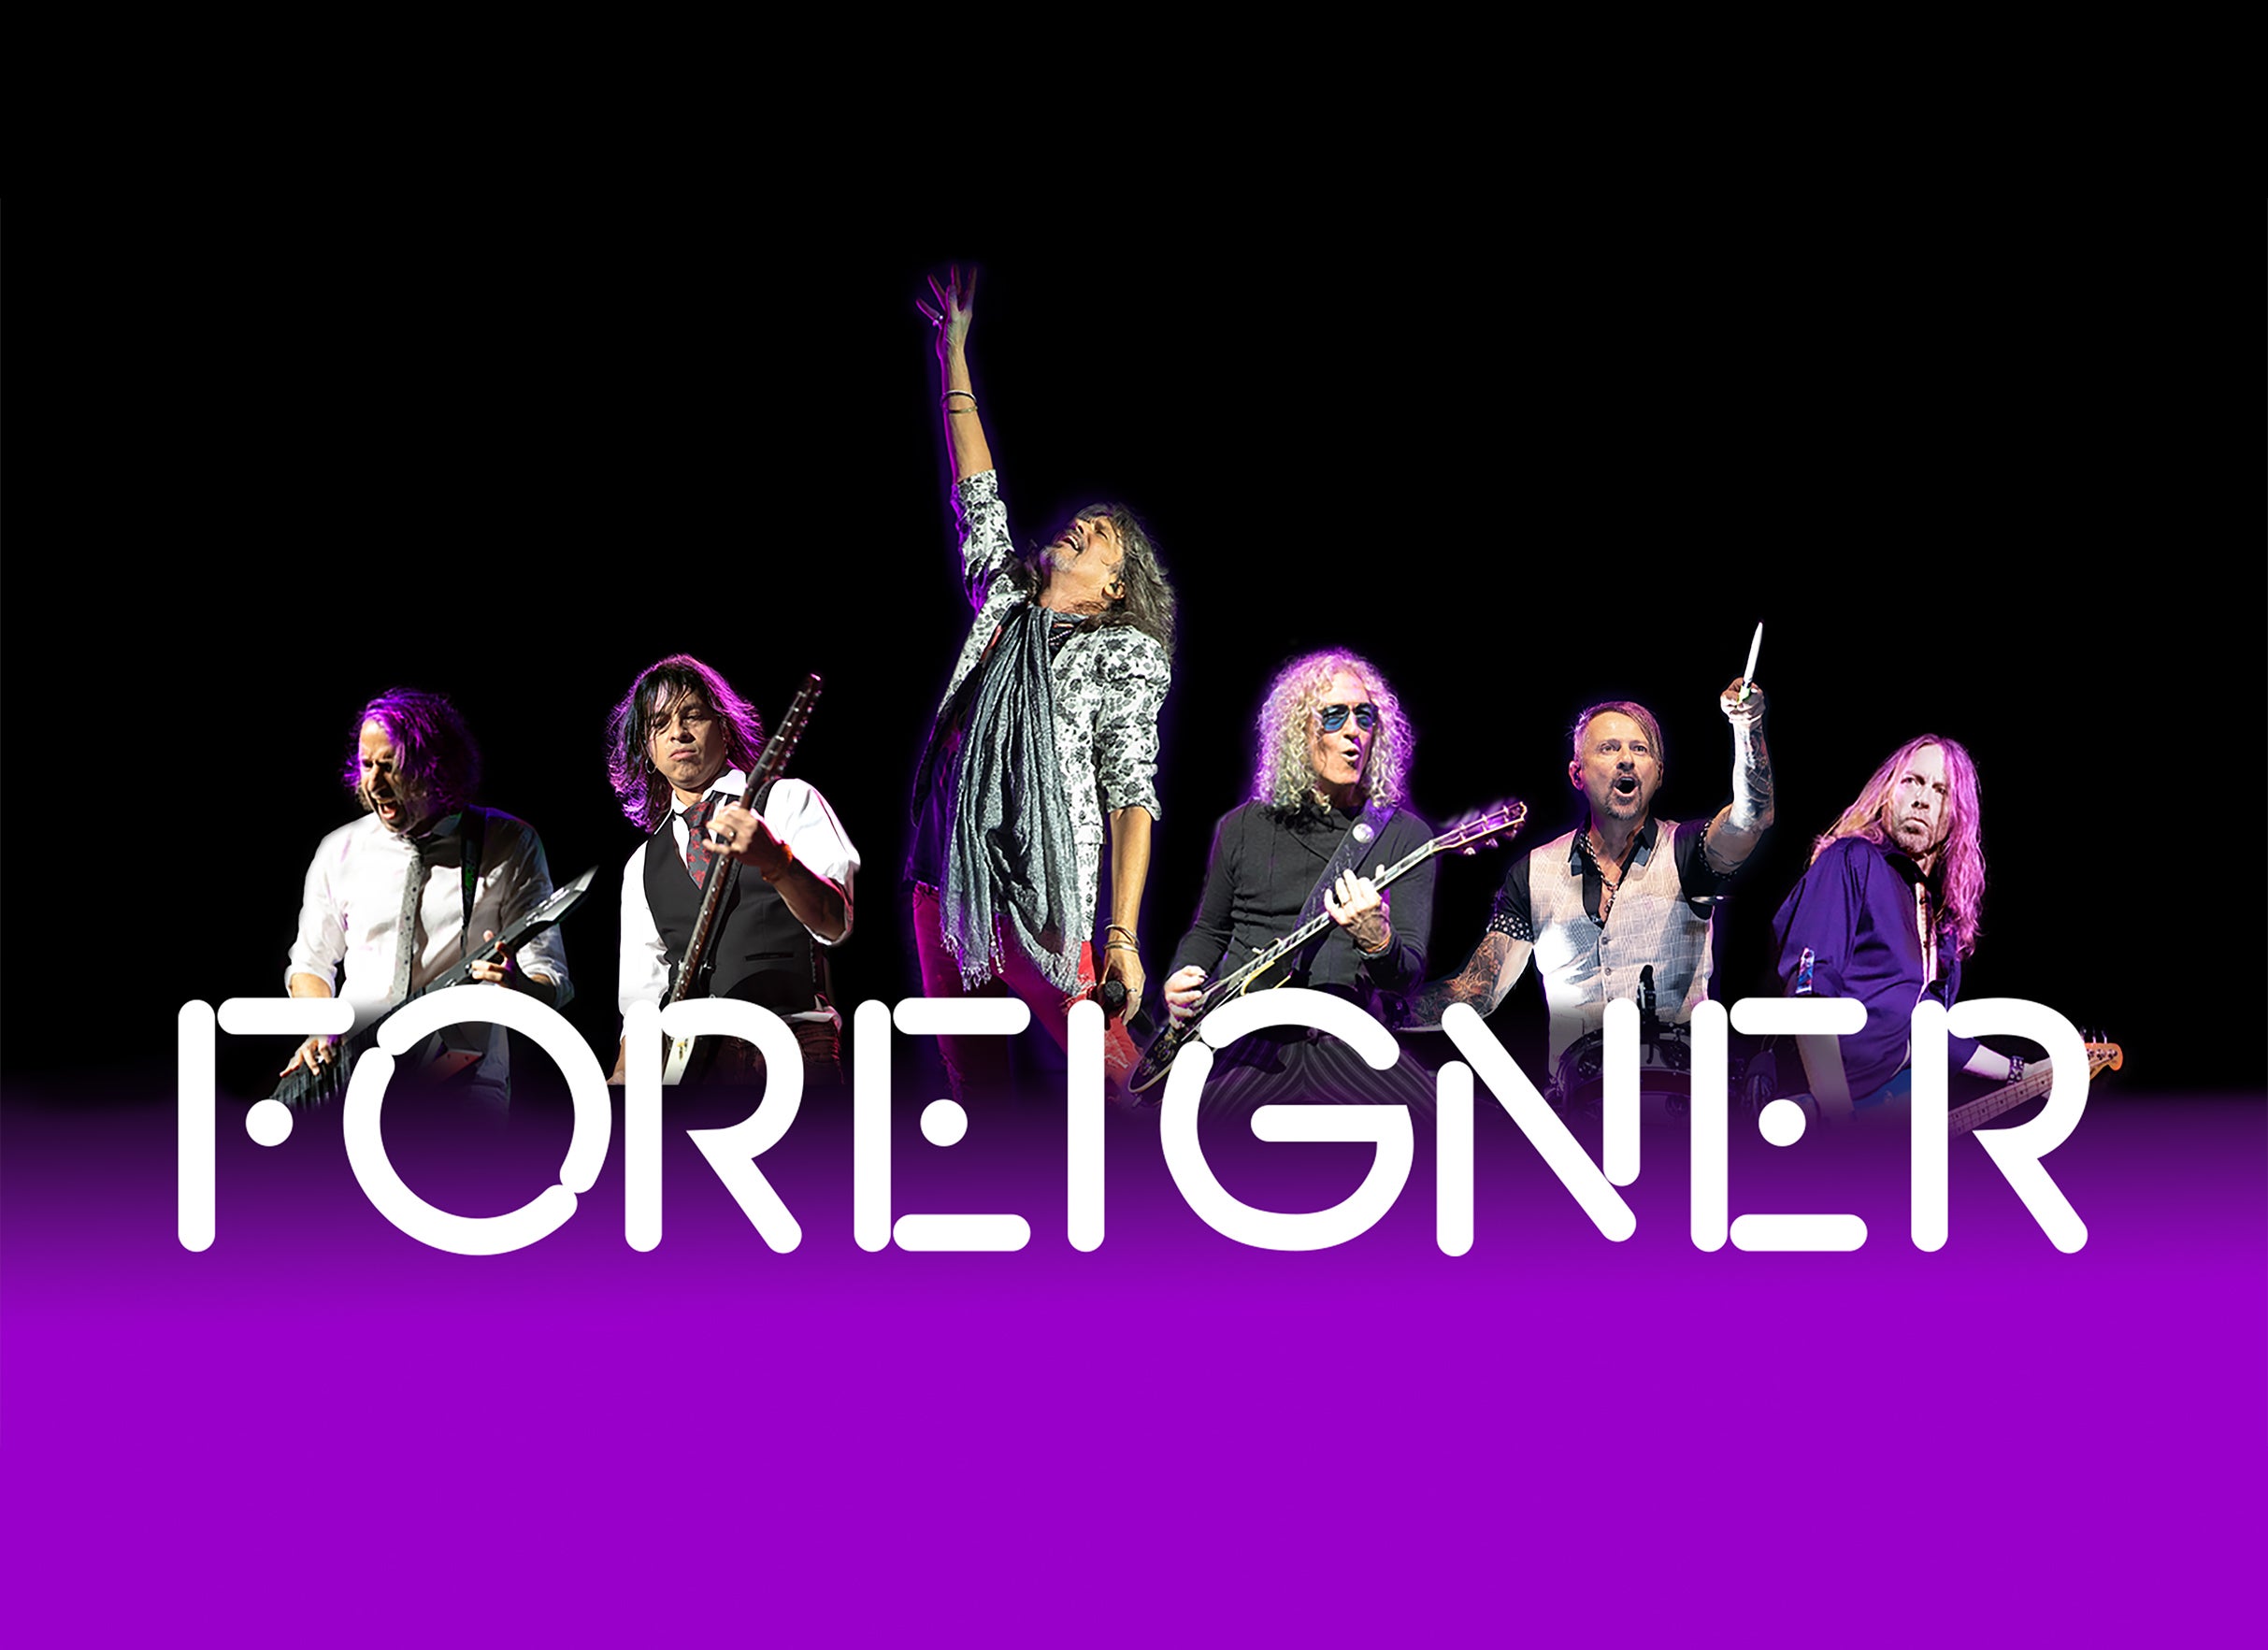 Foreigner: Feels Like the Last Time Farewell Tour in Las Vegas promo photo for Citi® Cardmember presale offer code